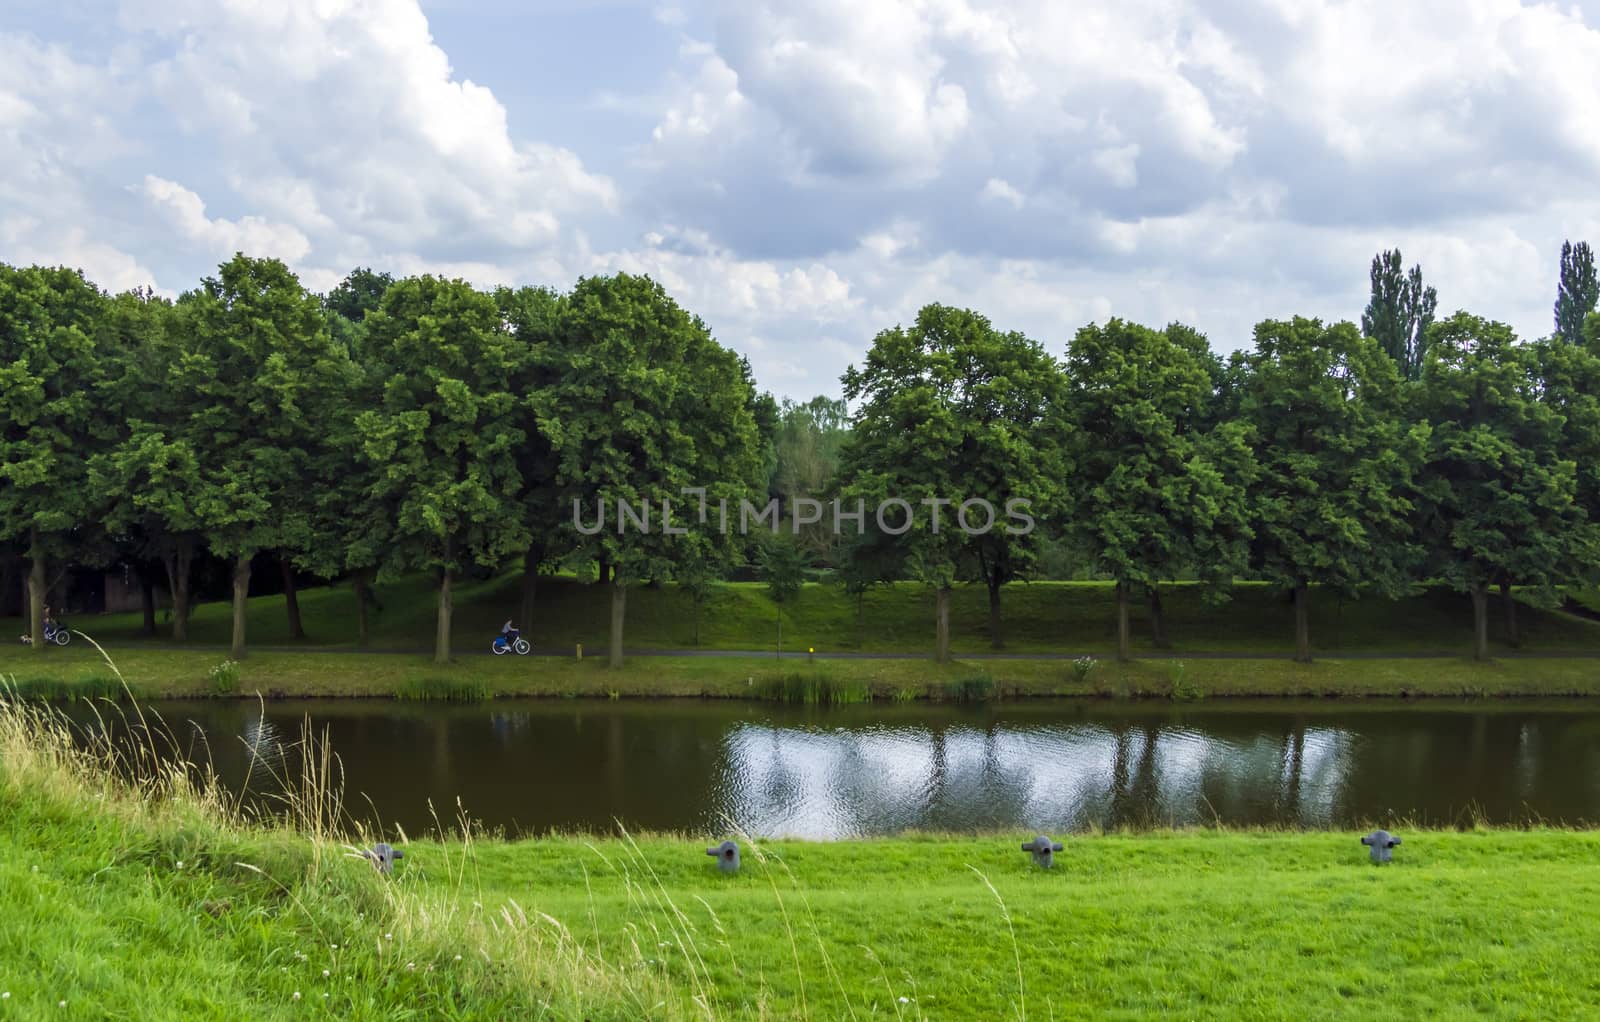 Summer landscape at the medieval fort of Naarden in the Netherla by Tetyana